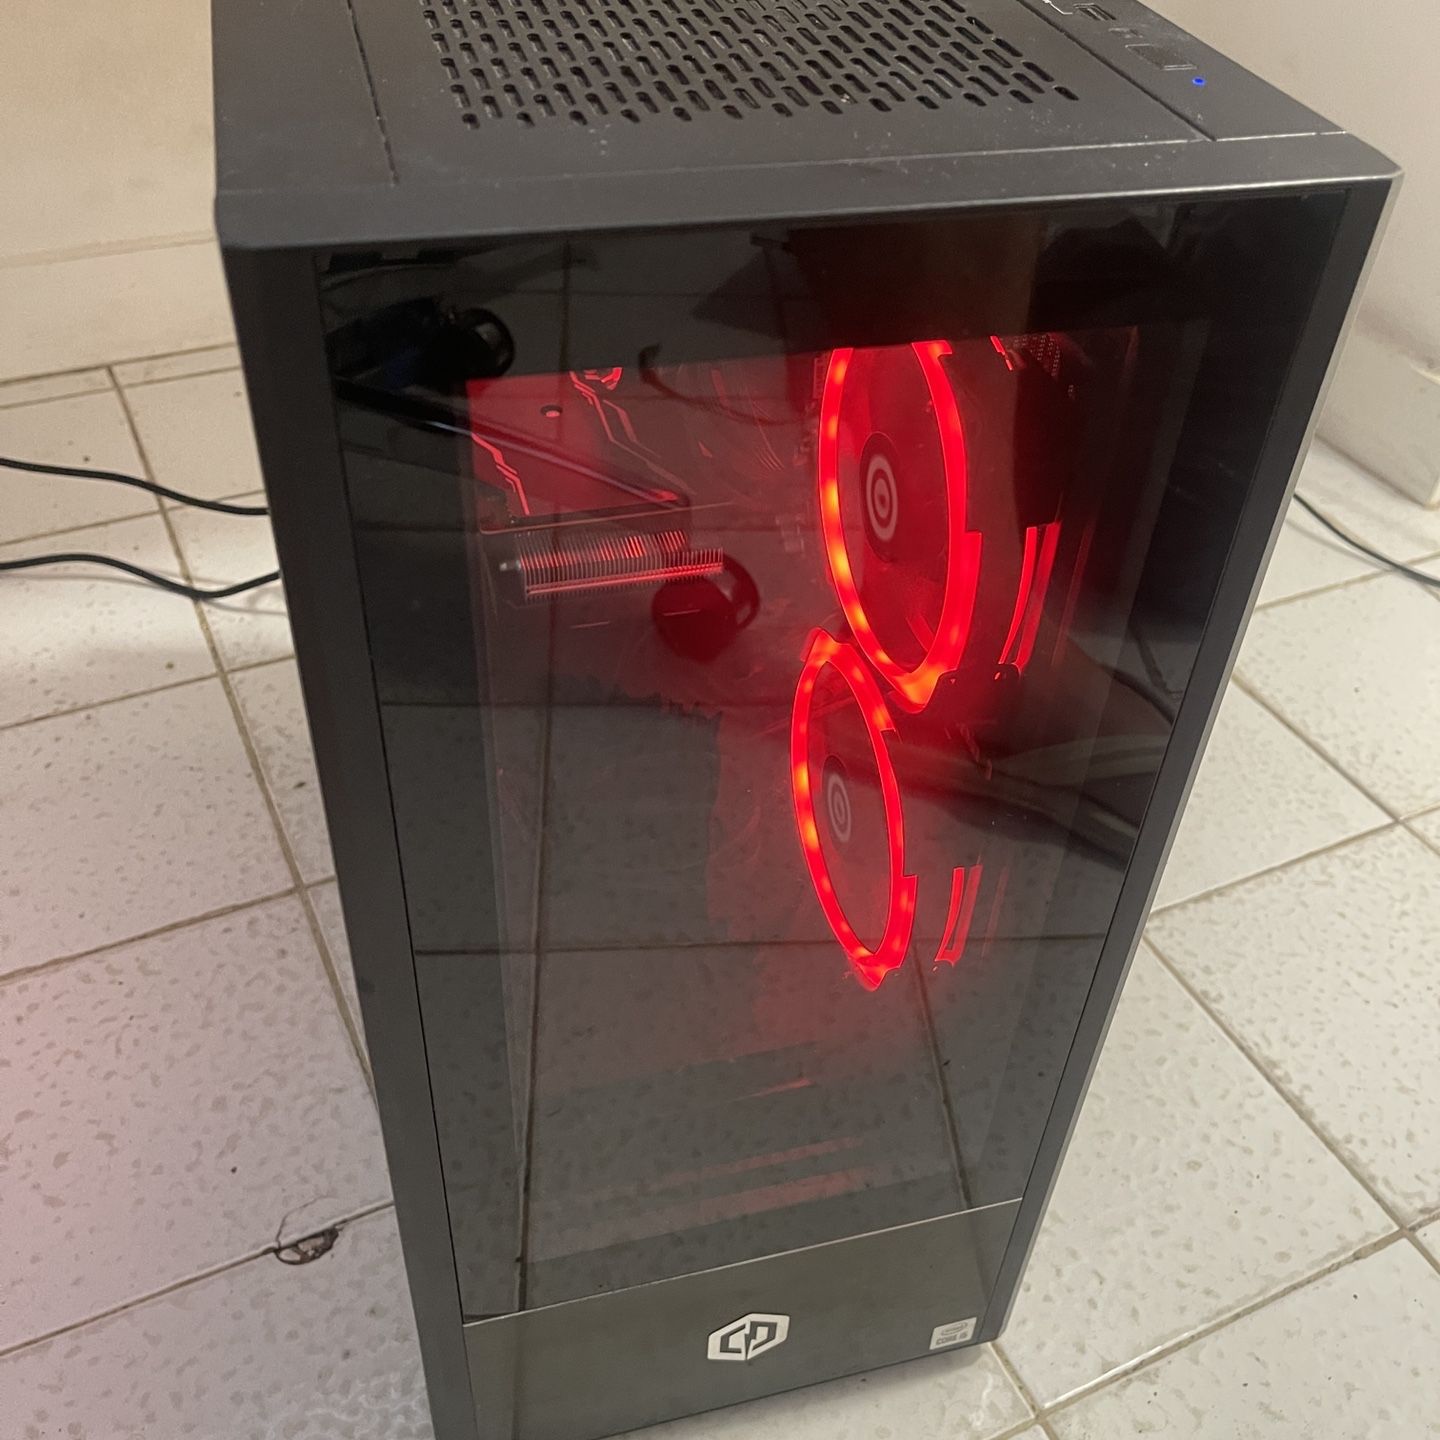 CyberPowerPC Gamer Xtreme Gaming Desktop - High Performance and Great Condition